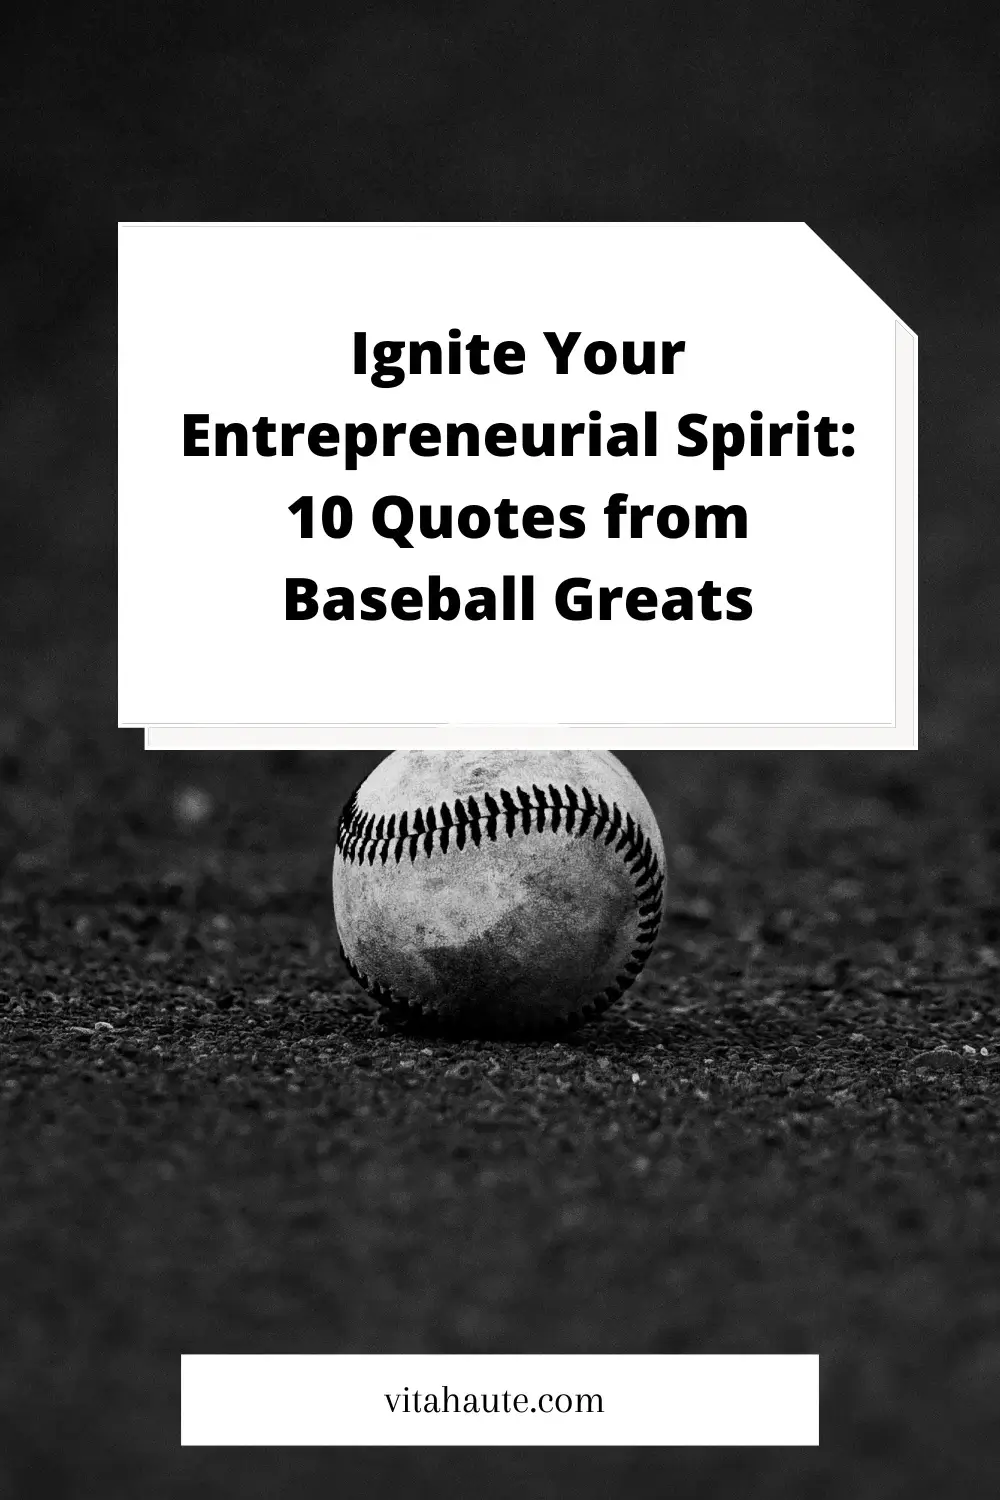 A collage of quotes by baseball players intended to help entrepreneurs